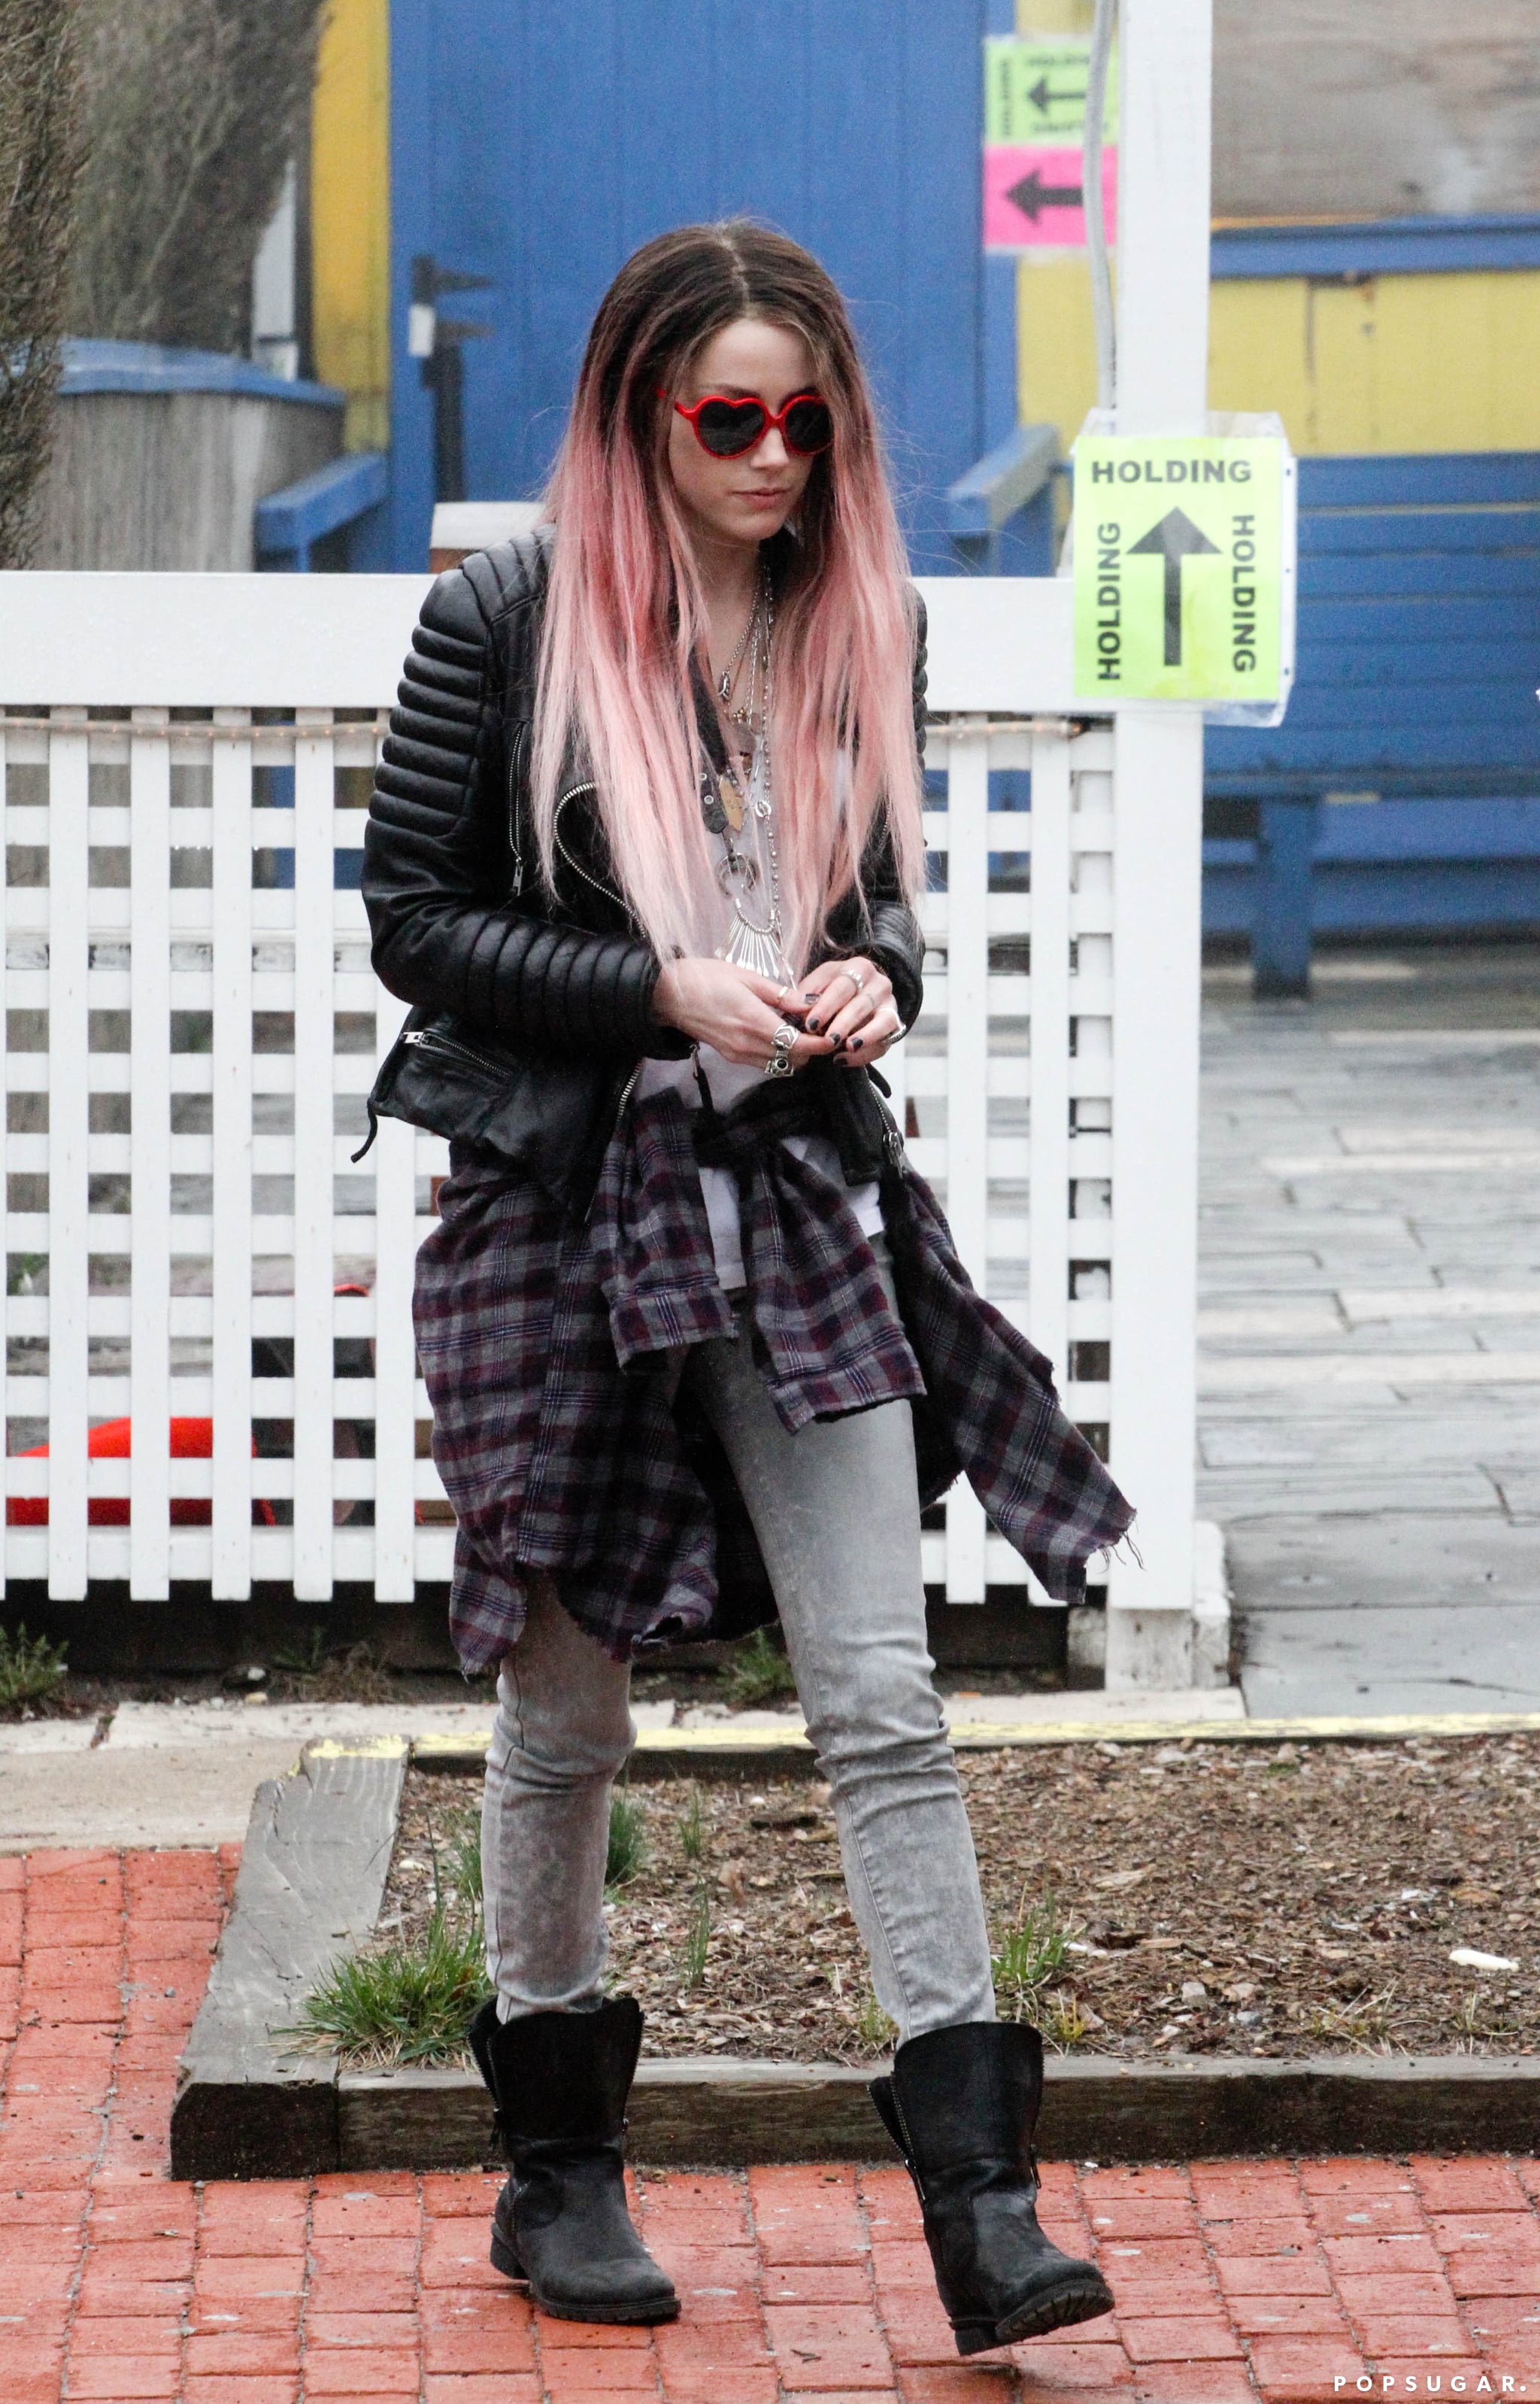 Amber-Heard-Pink-Hair-Pictures.JPG